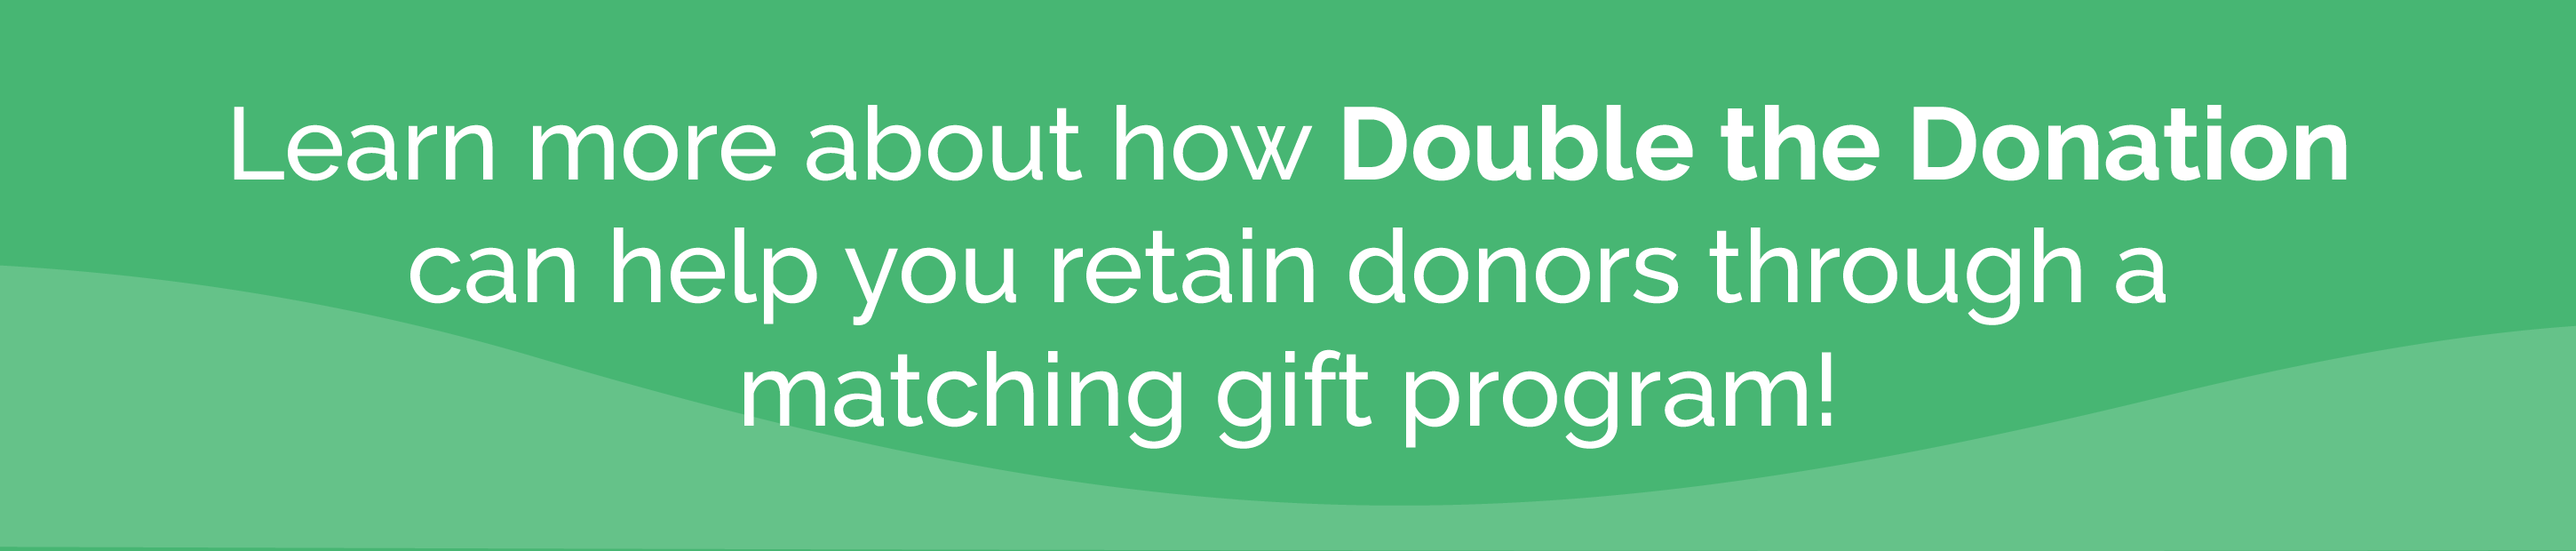 Click this graphic to learn more about how Double the Donation can help you retain donors through a matching gift program.